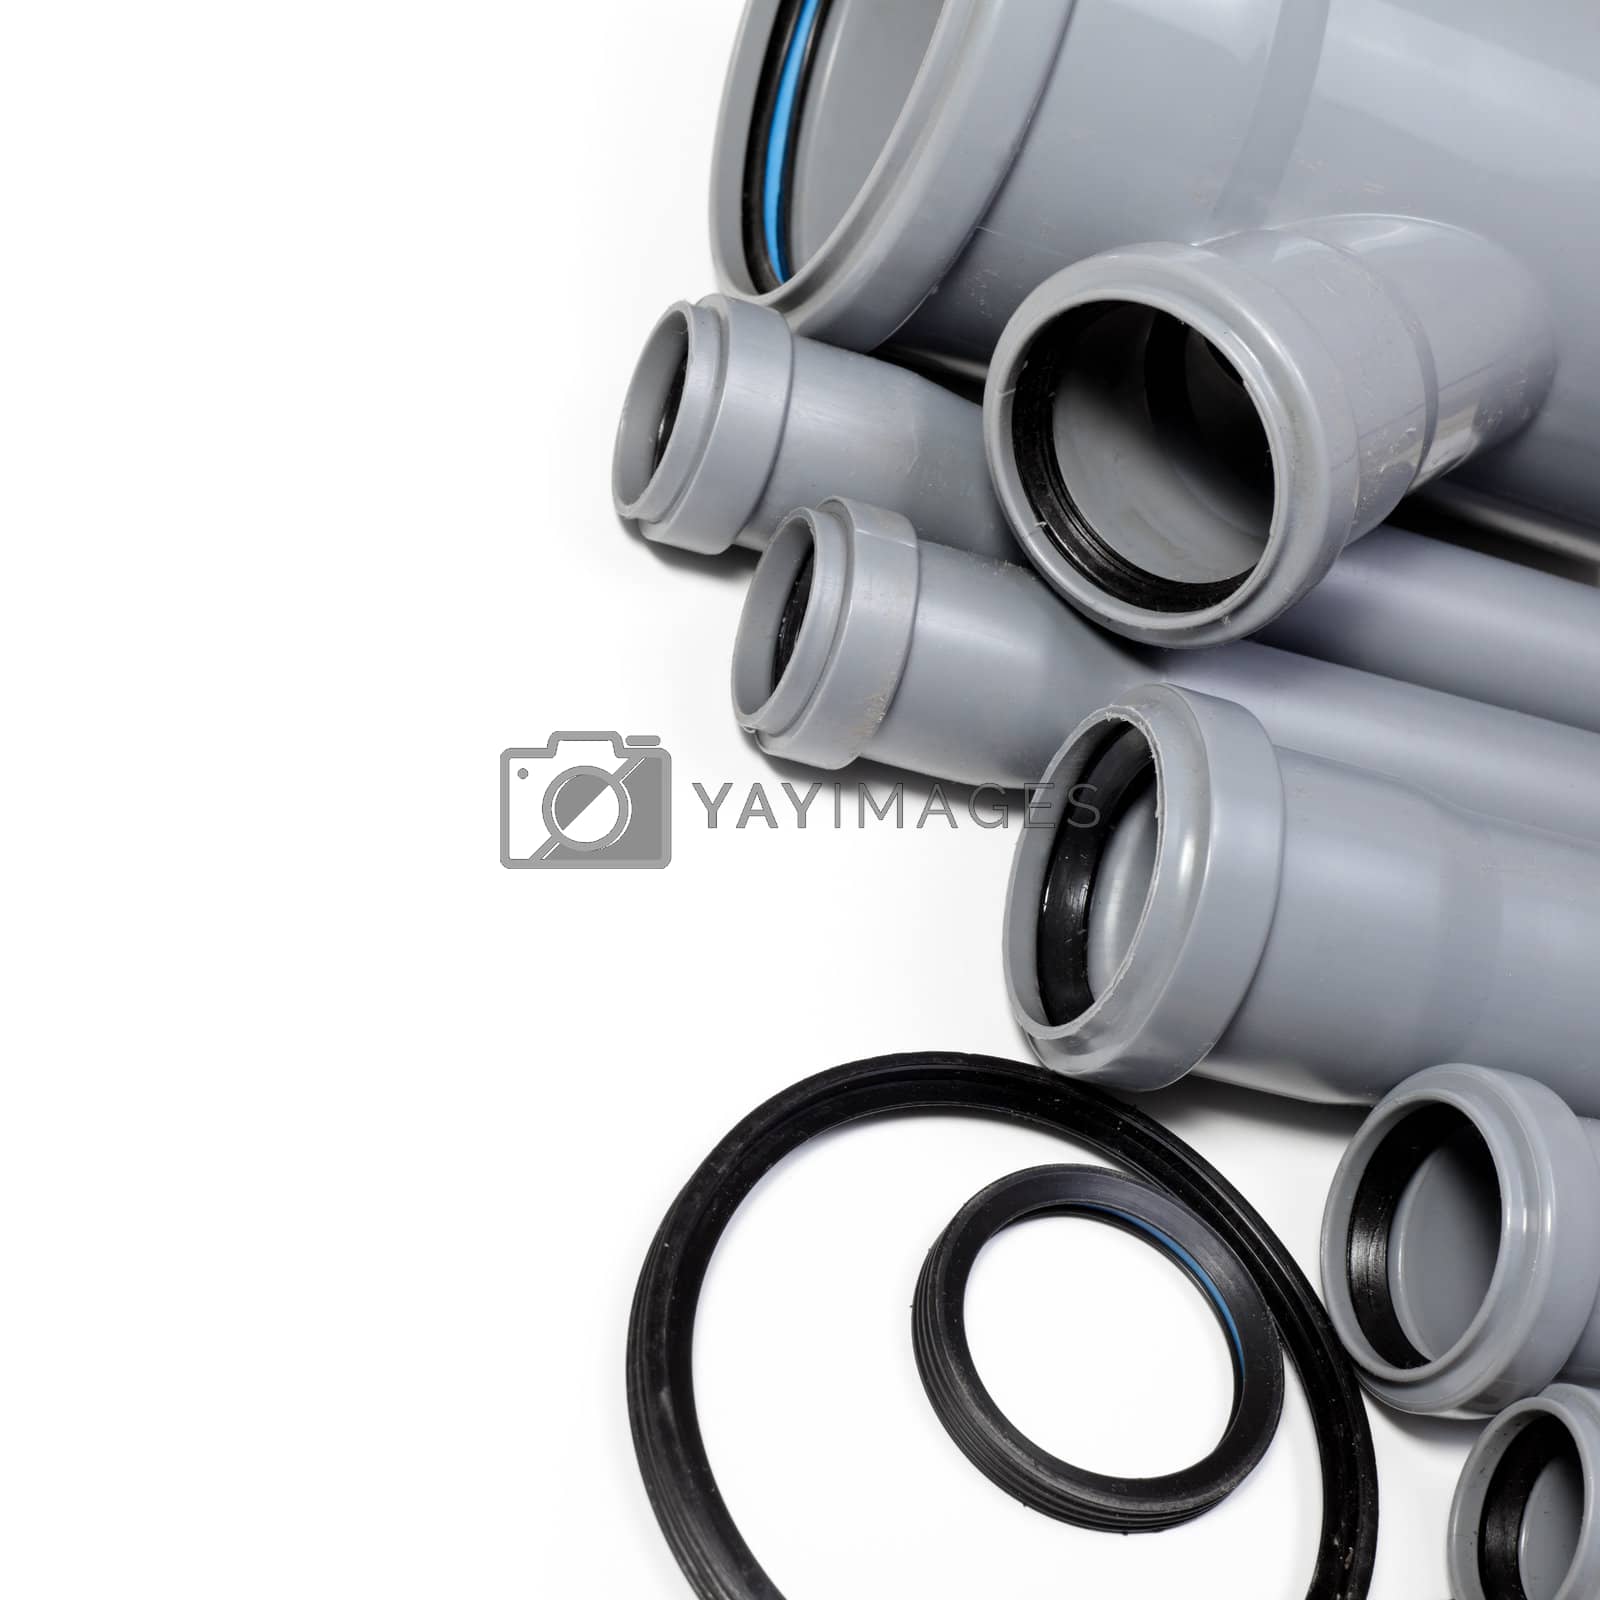 Royalty free image of Sewer pipes by naumoid